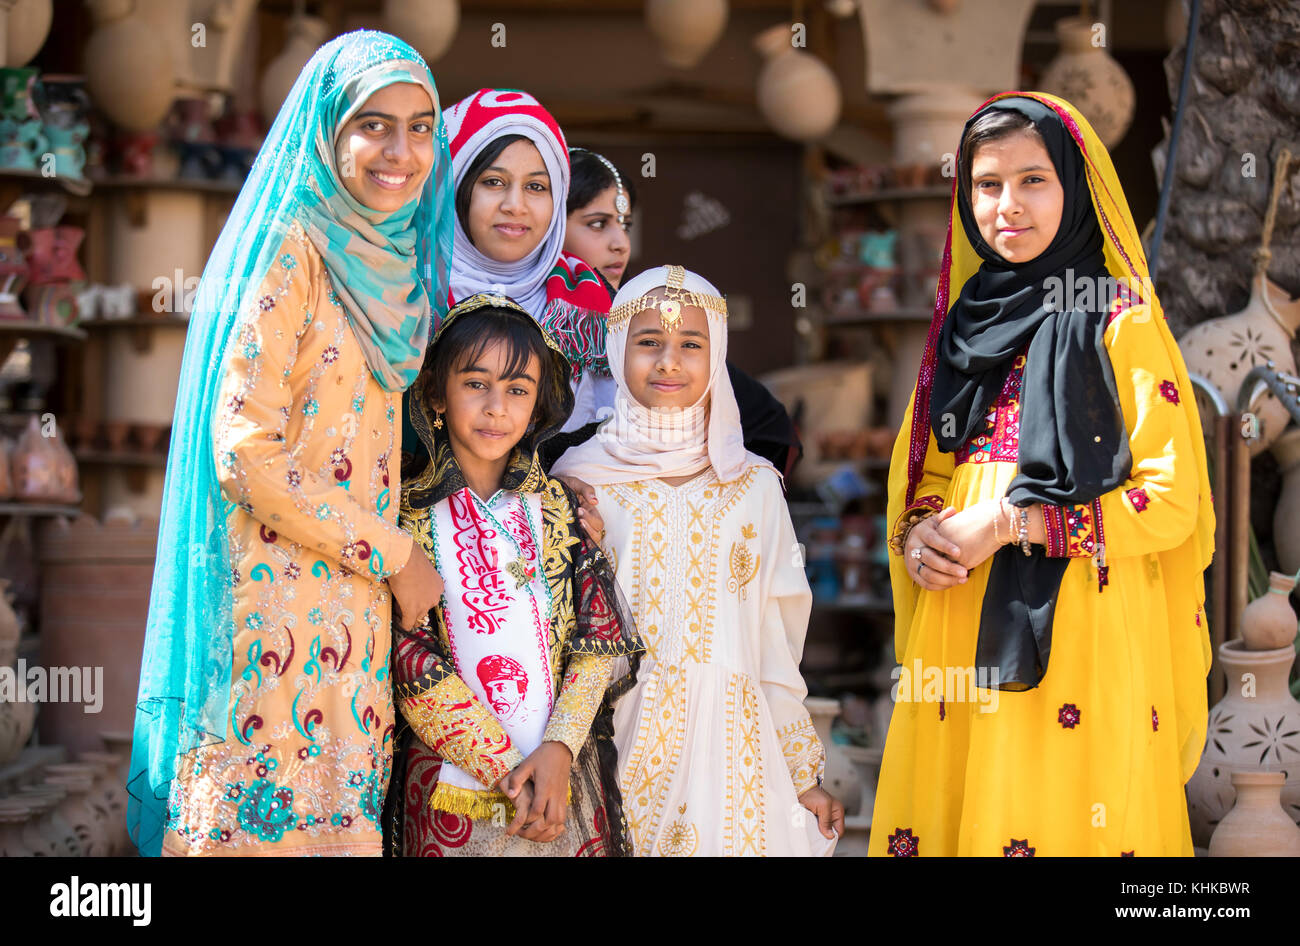 omani girls dressed in traditional colourful dresses at a market Stock Photo